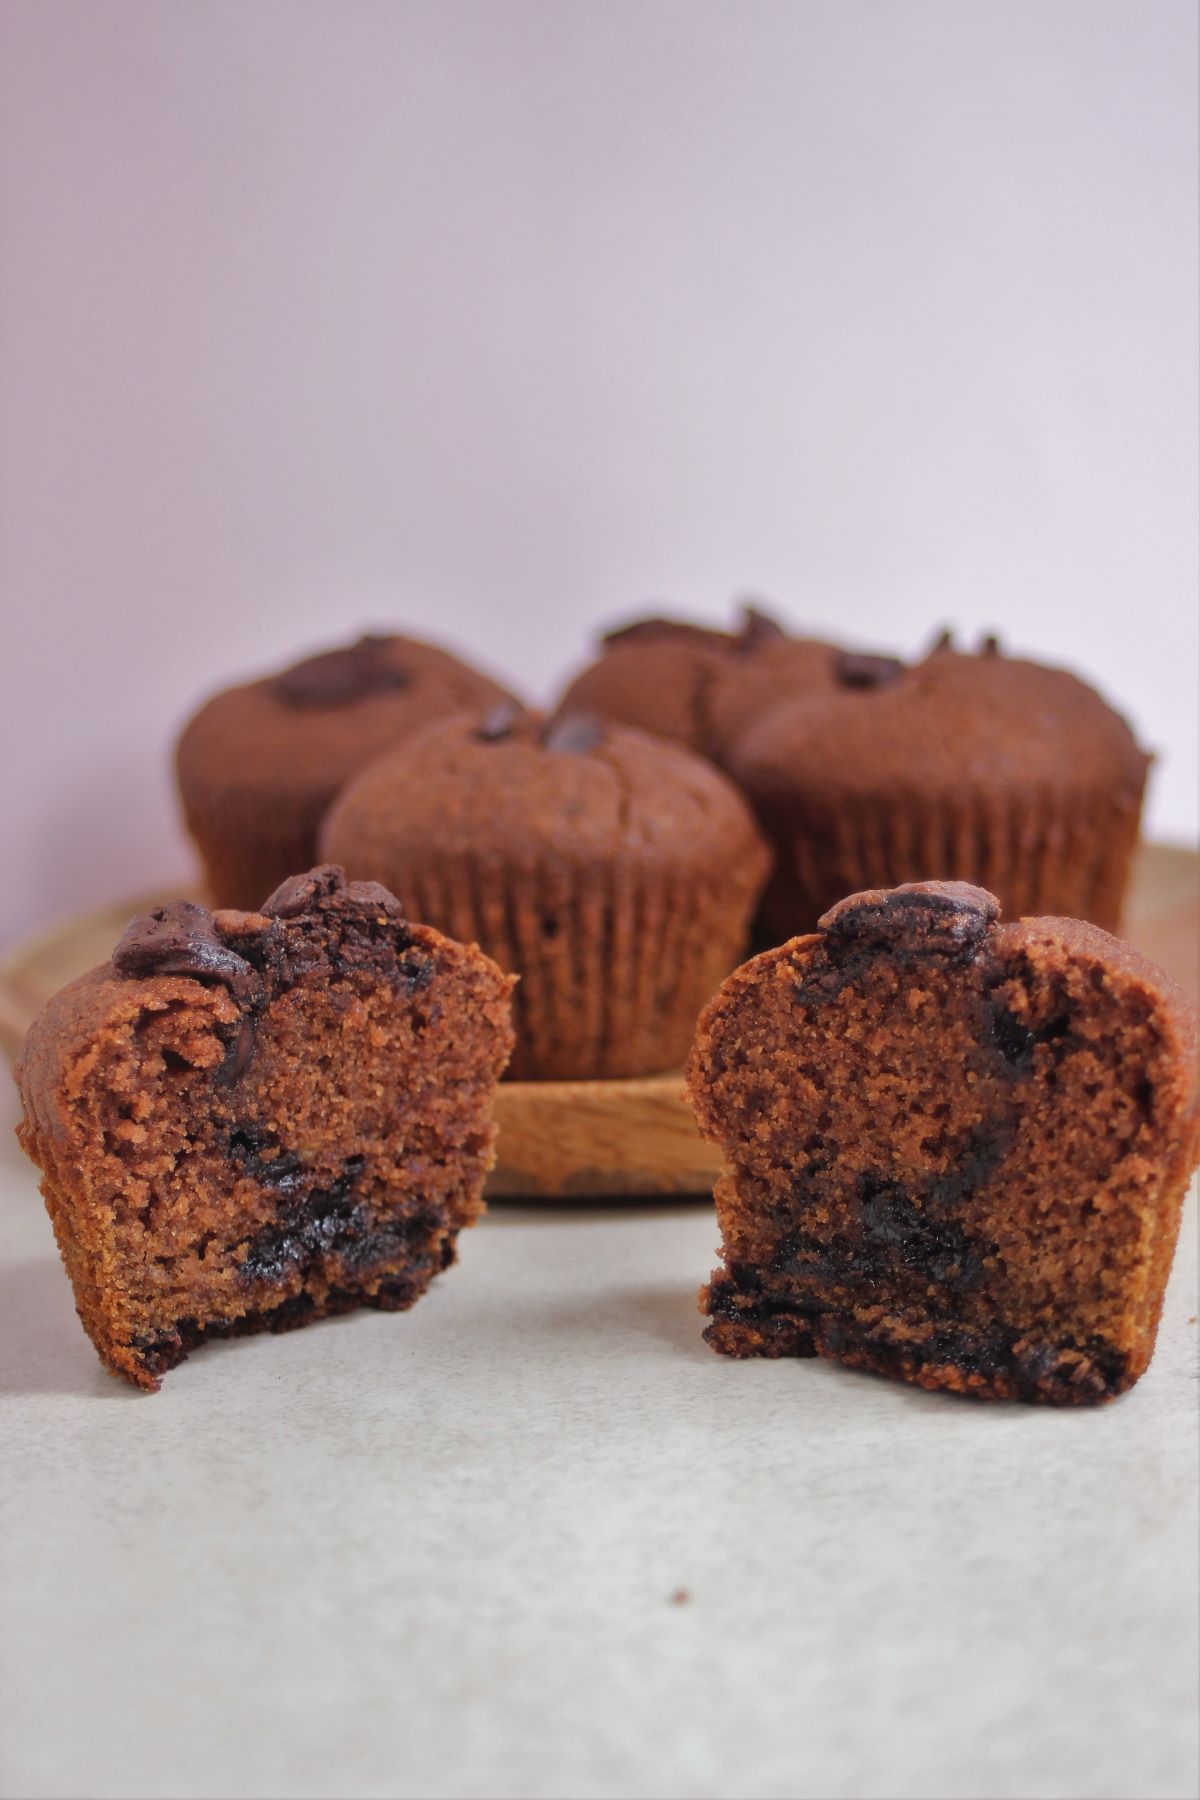 A chocolate banana muffin cut in half, seen from the front. More muffins behind on a wooden plate.